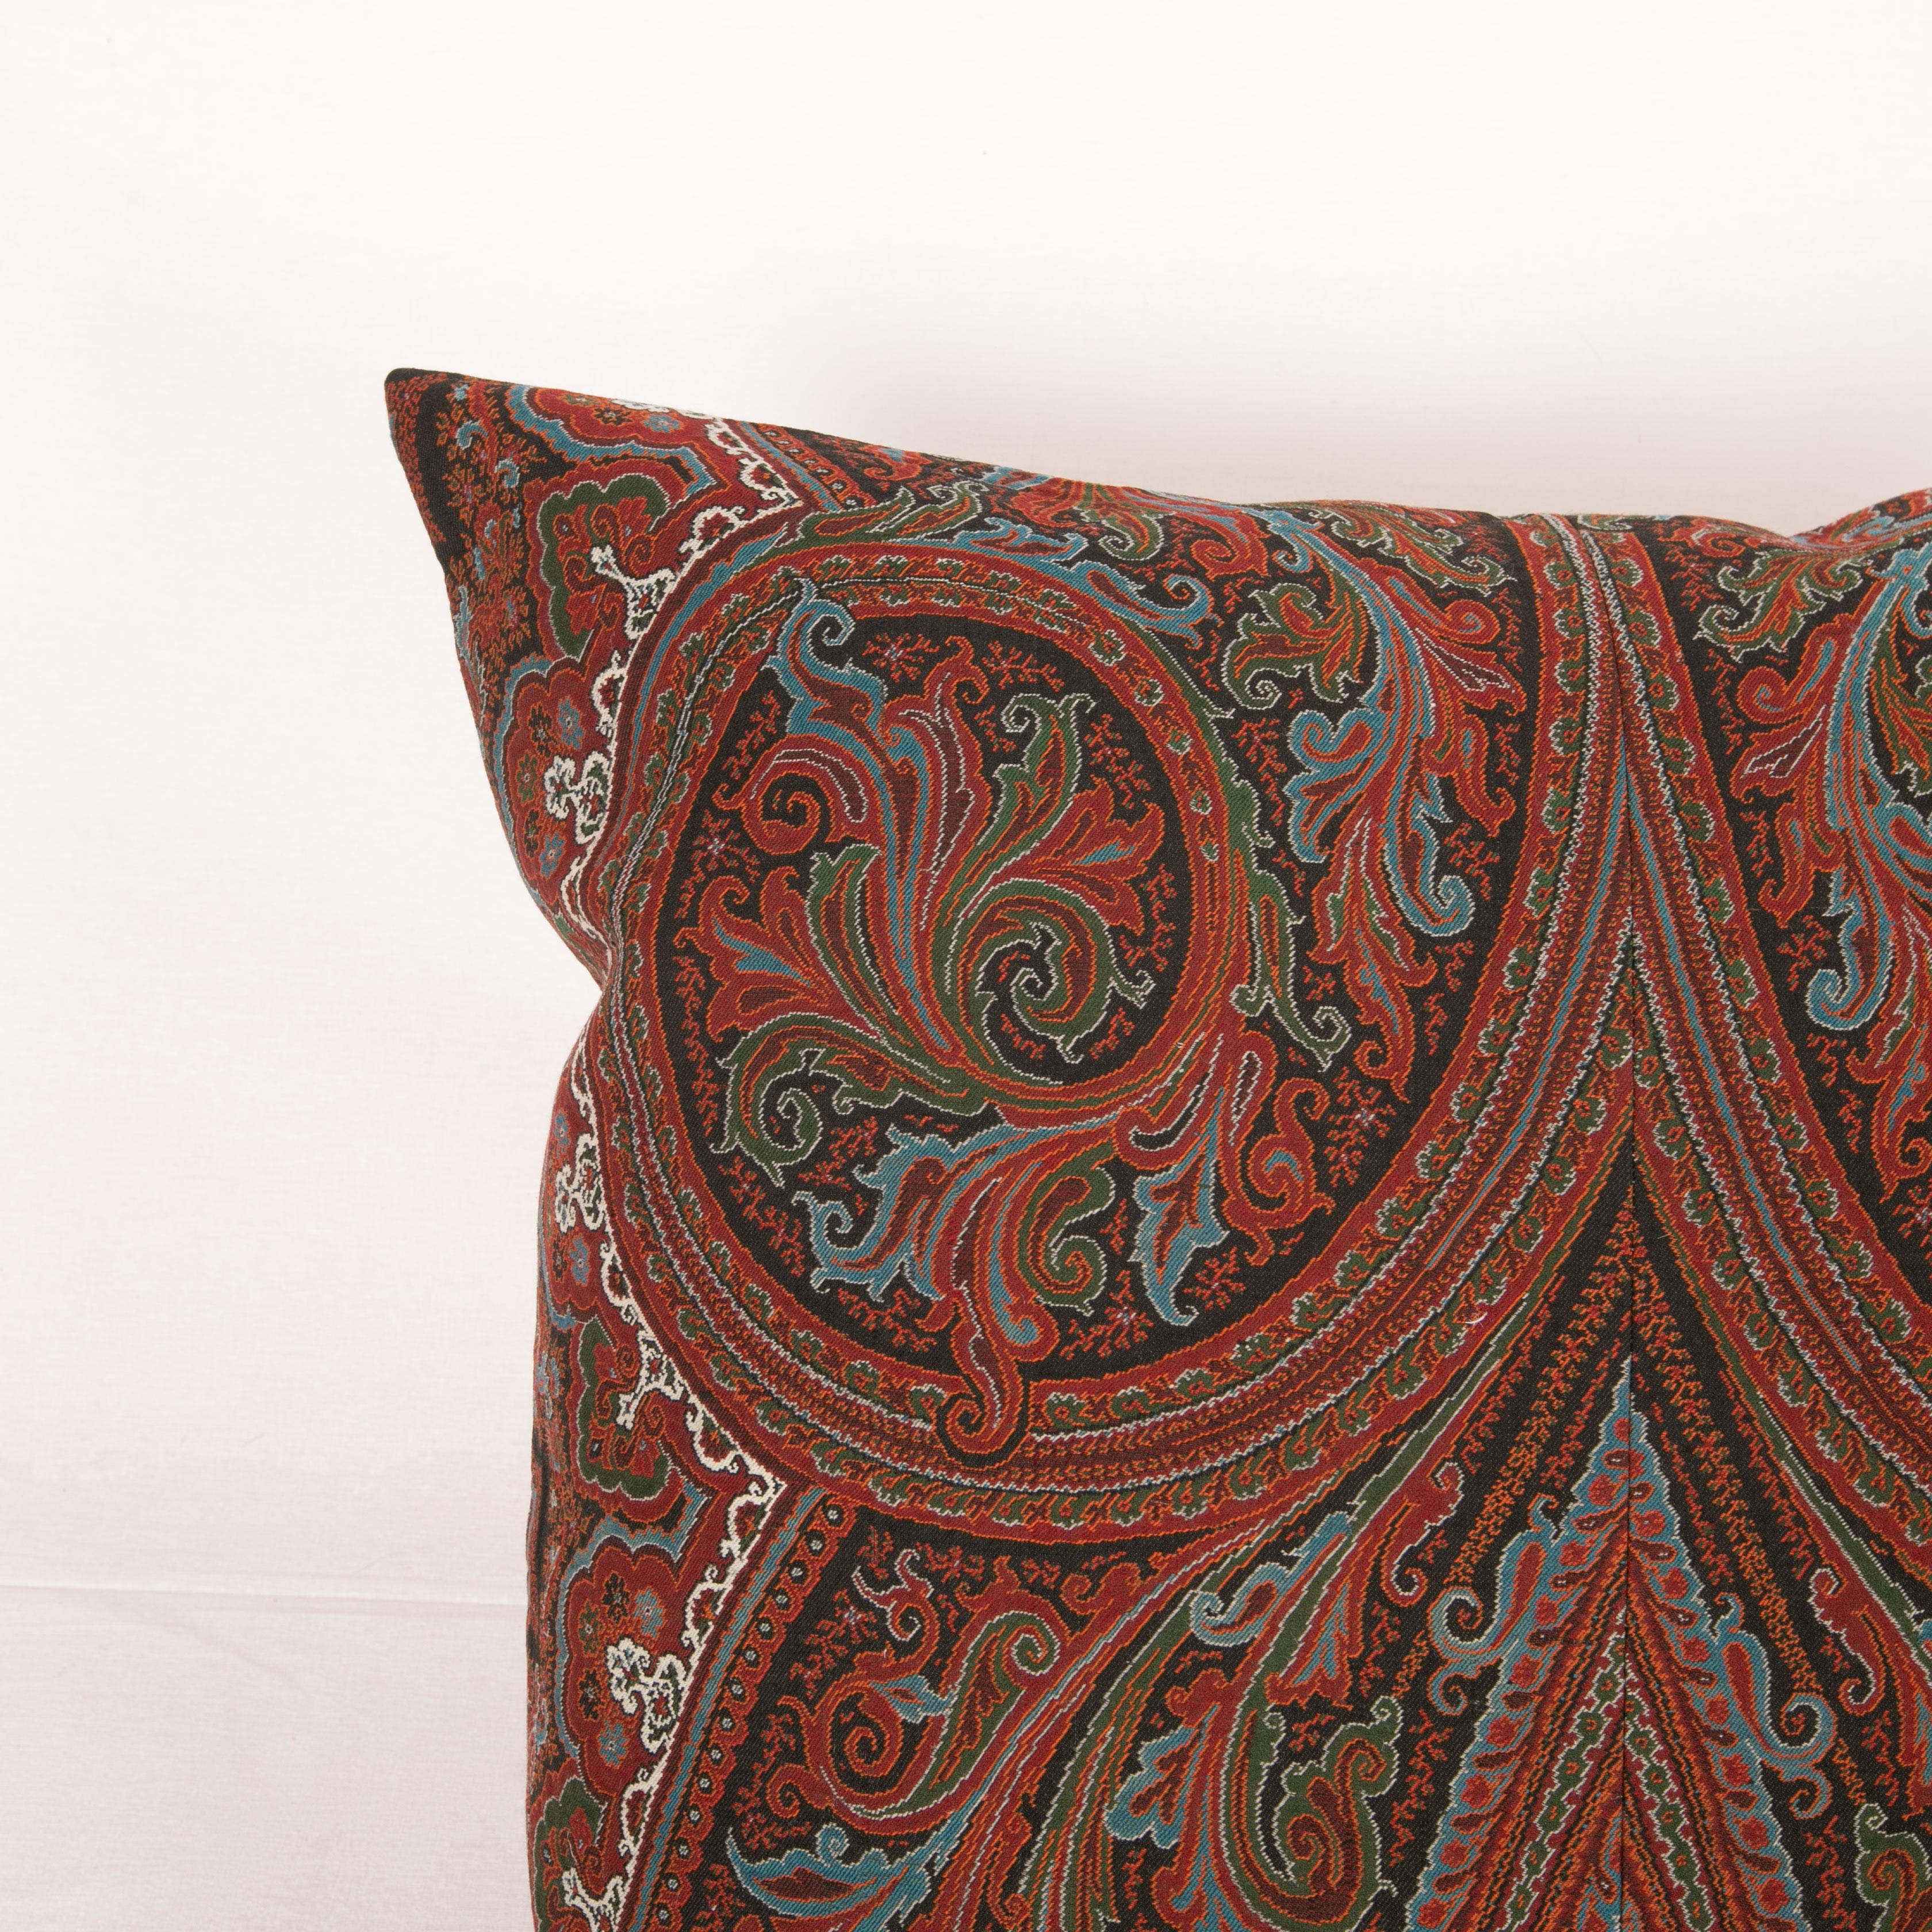 Woven Antique Paisley Shawl Pillow, 19th C.